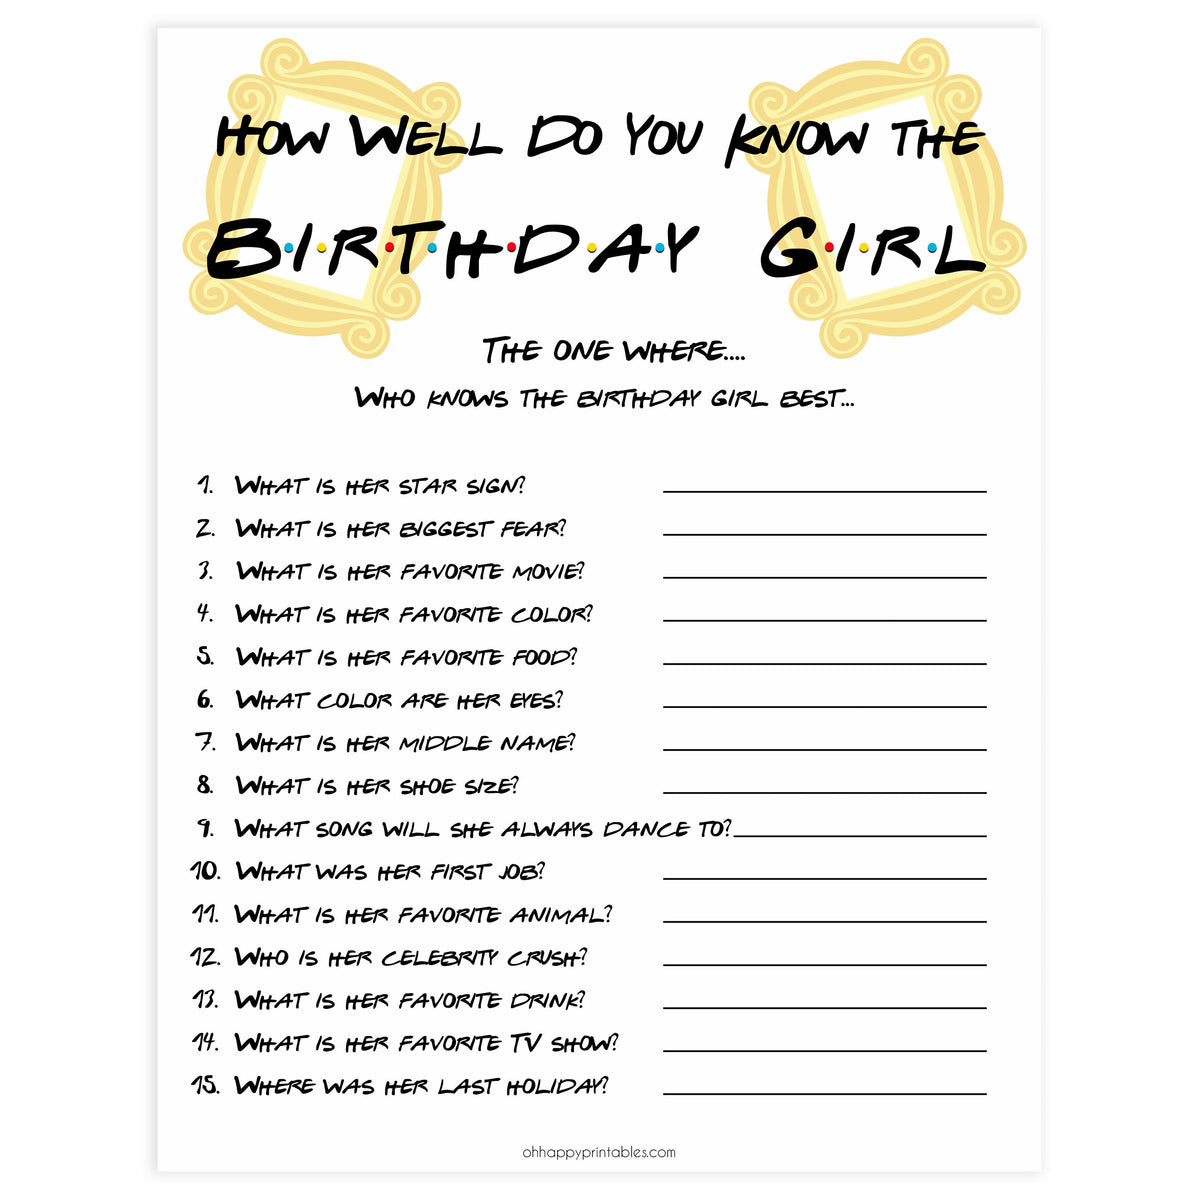 friends birthday games, how well do you know the birthday girl, printable birthday games, friends birthday, fun birthday games